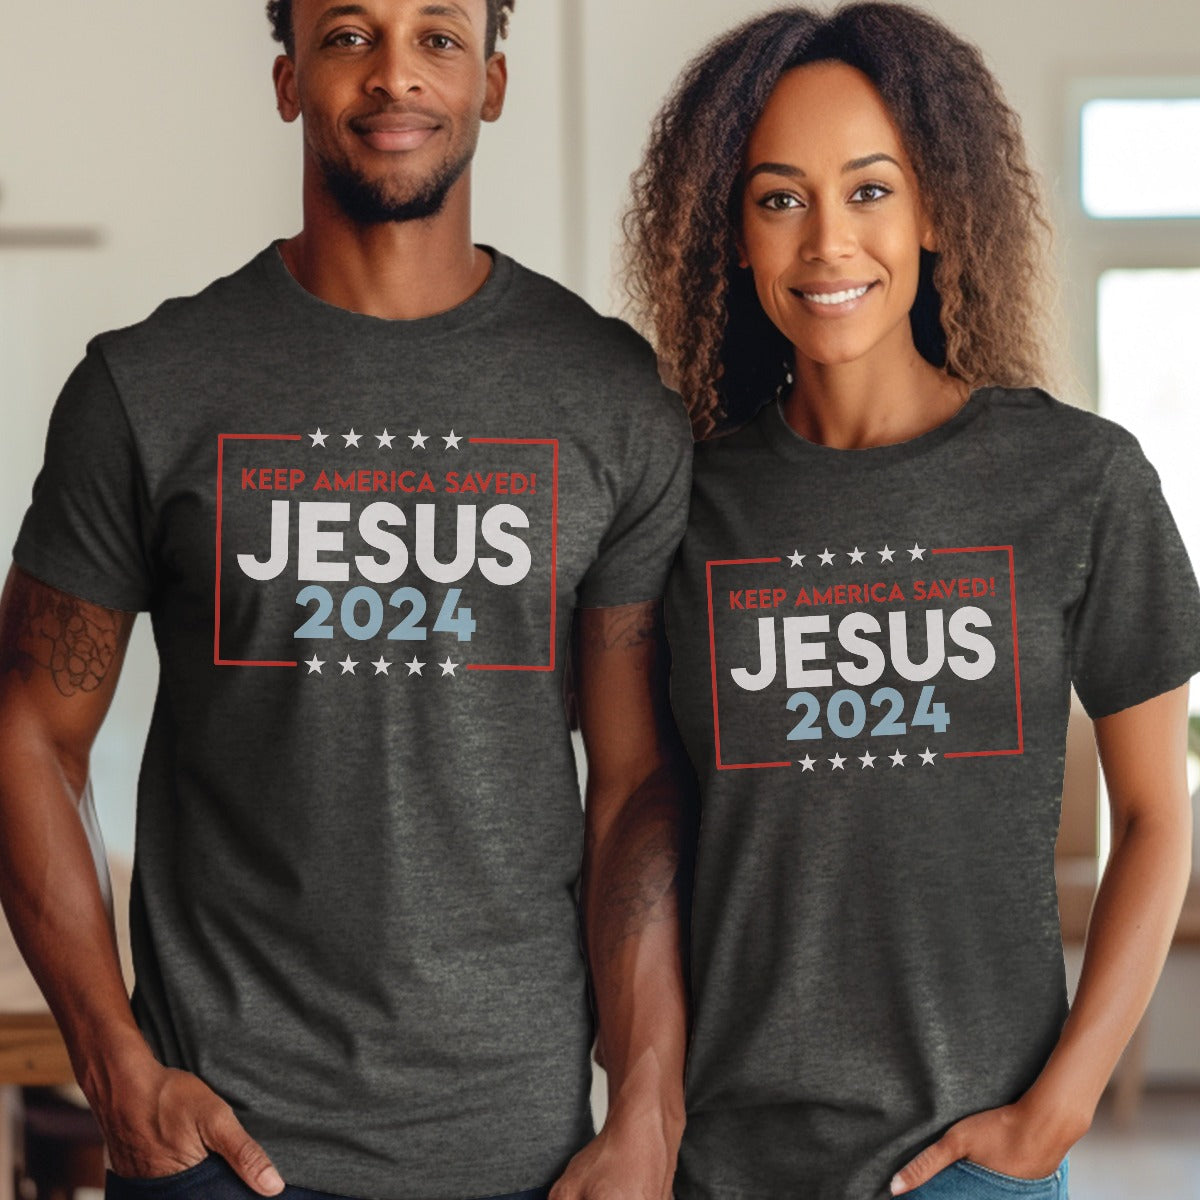 Patriotic married couple wearing heather dark gray President election vote unisex Christian t-shirts with "Jesus 2024 - Keep America Saved" and stars printed in bold red, white, and blue fonts, made in the USA, made for men and women God & Country Patriots